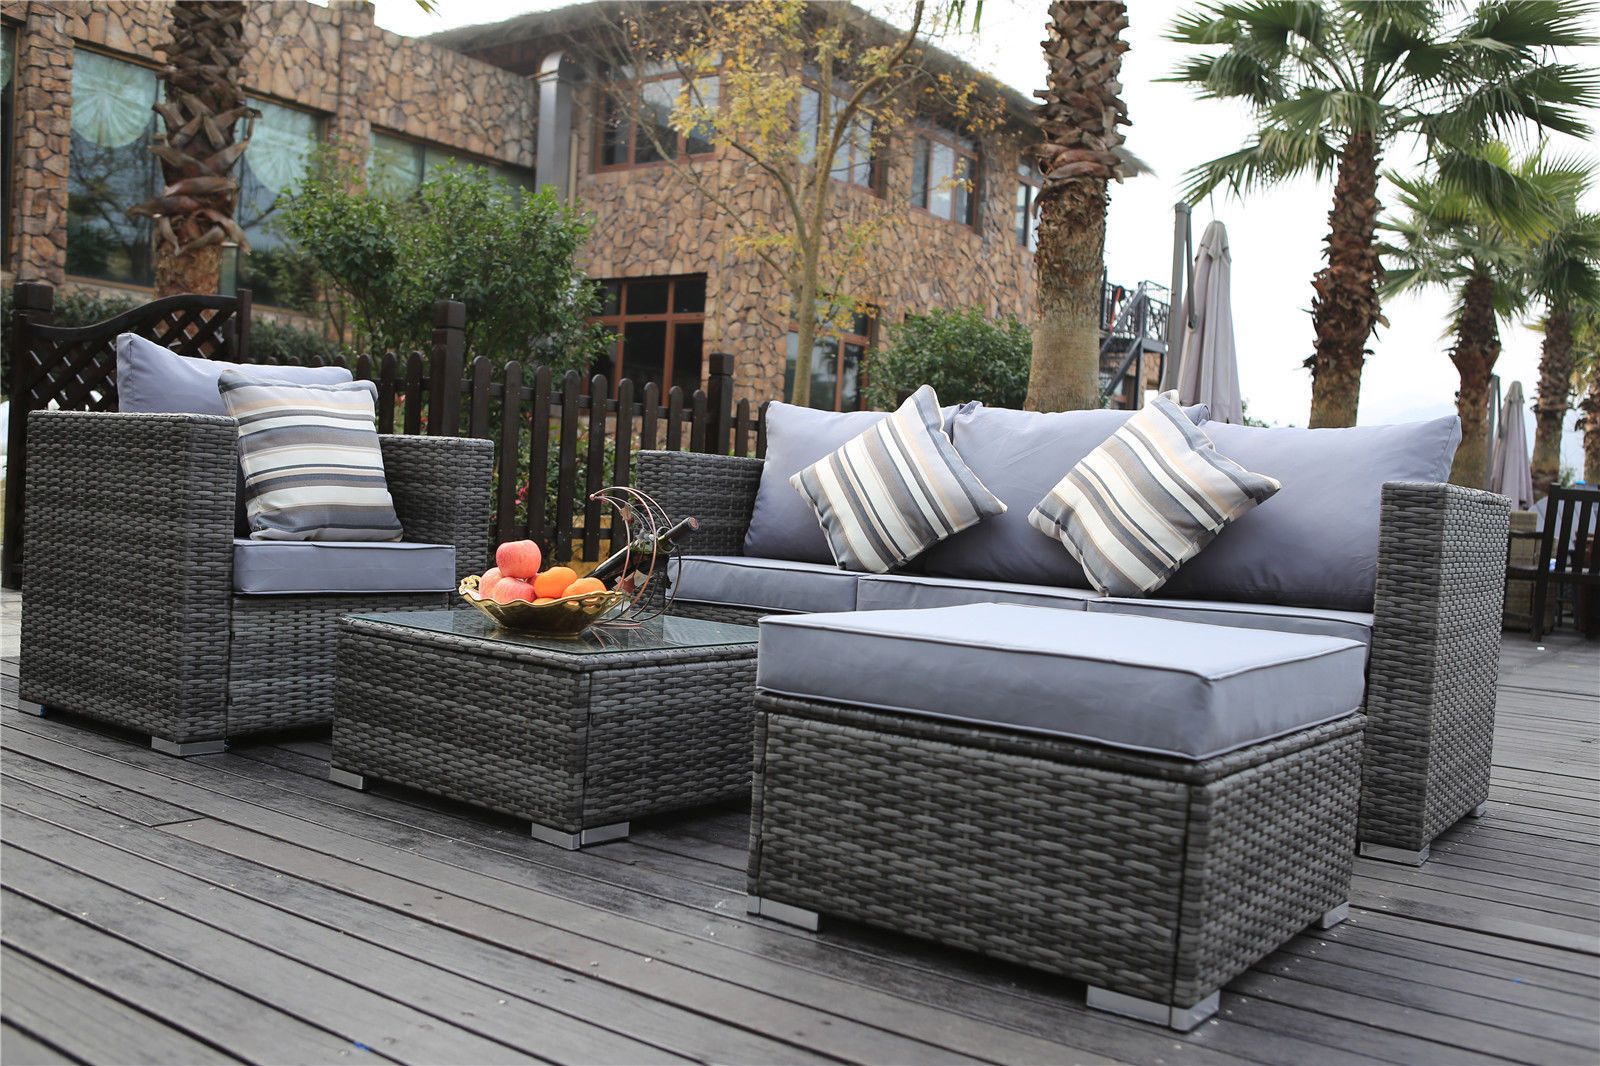 New Rattan Garden Furniture Sofa Table Chairs Grey Patio Conservatory Within Outdoor Seating Sectional Patio Sets (View 3 of 15)